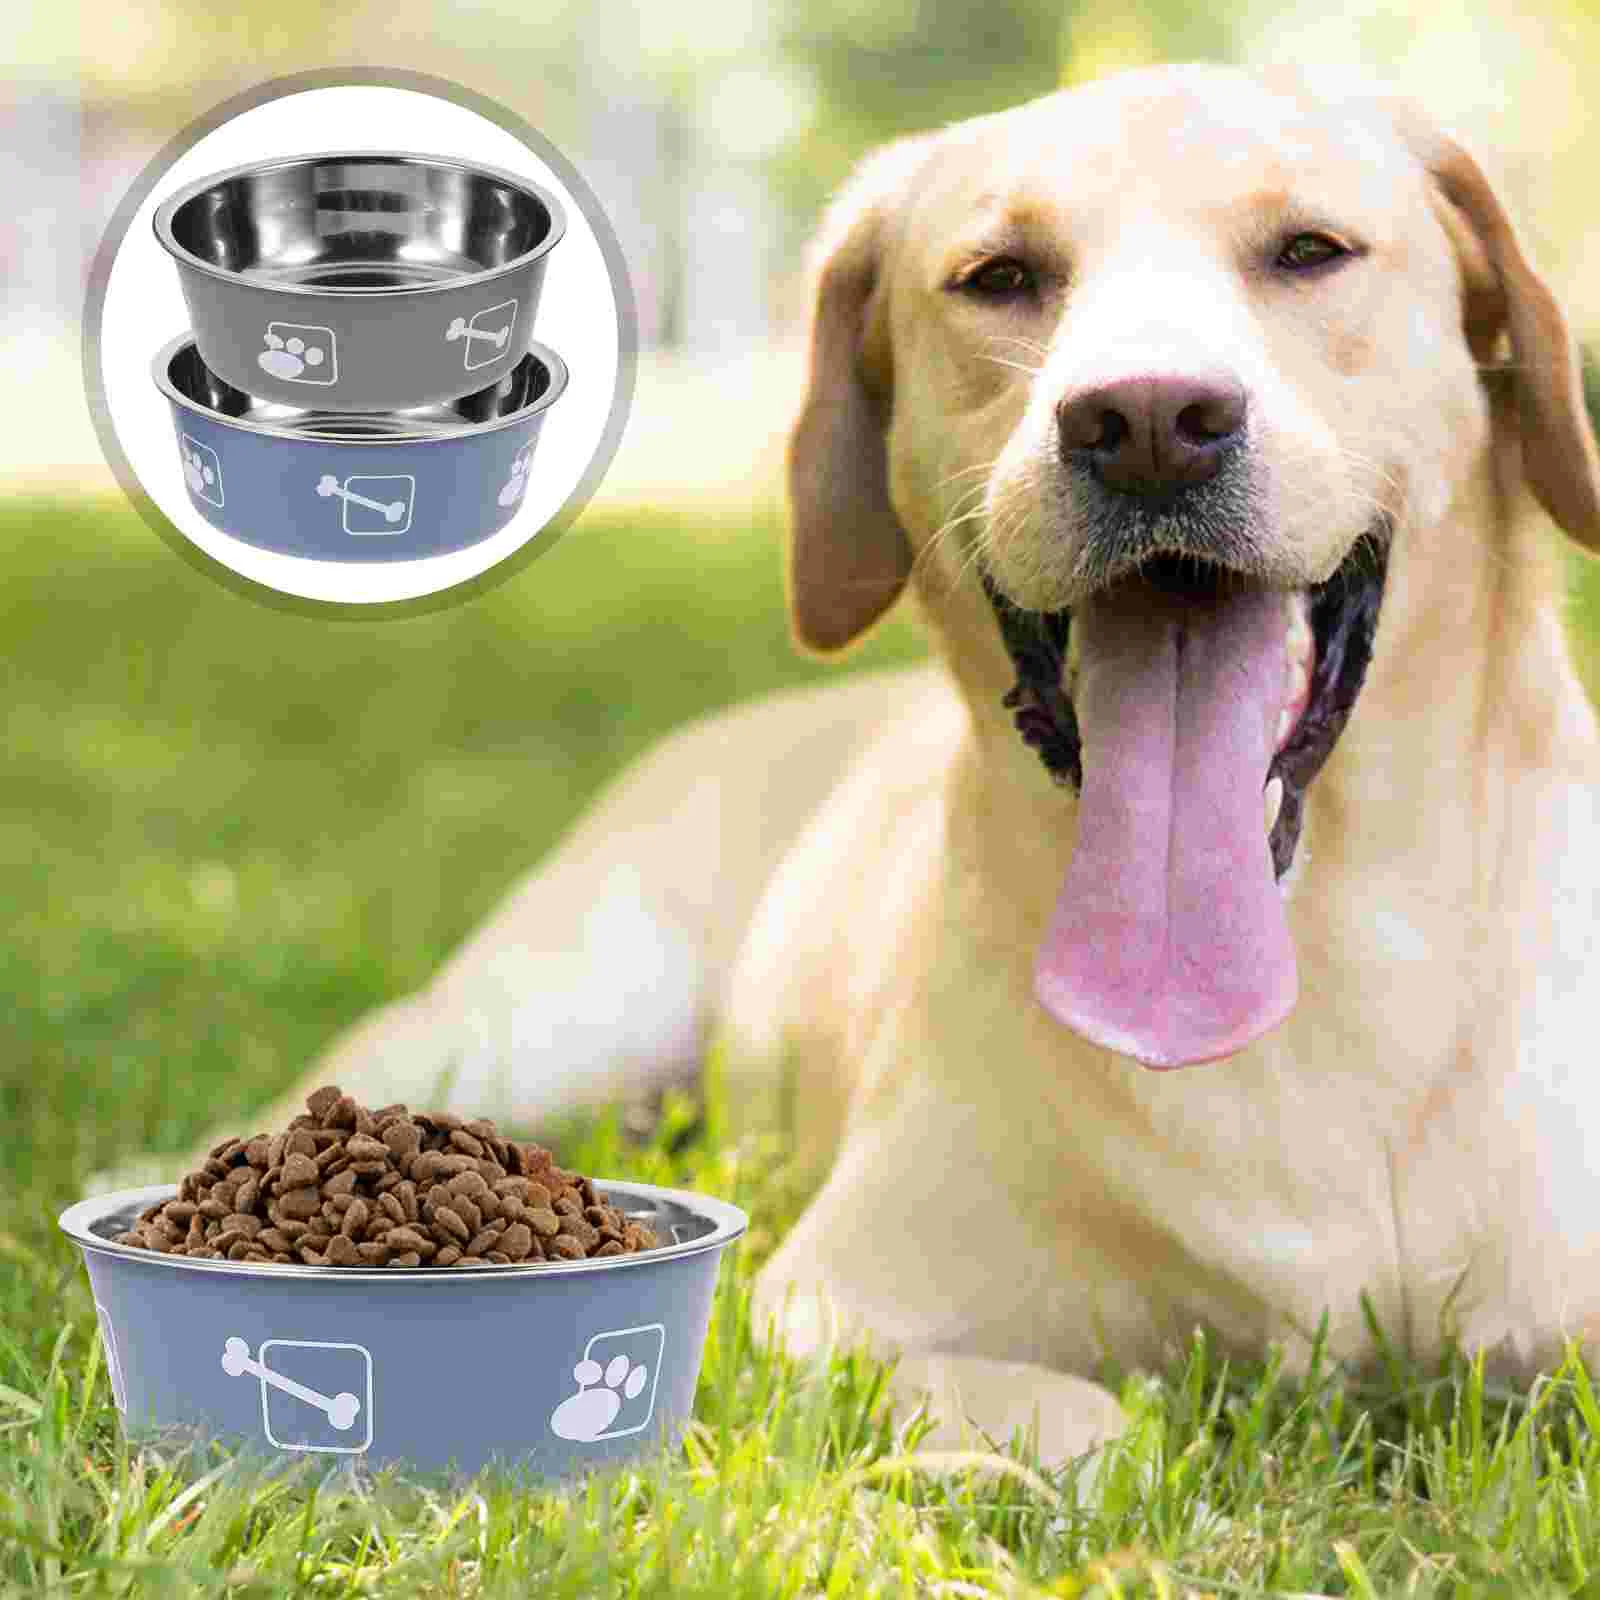 

Dog Bowl Pet Bowls Cat Feeding Feeder Stainless Water Puppy Skid Container Dispenser Holder Practical Non Anti Dishes Base Steel